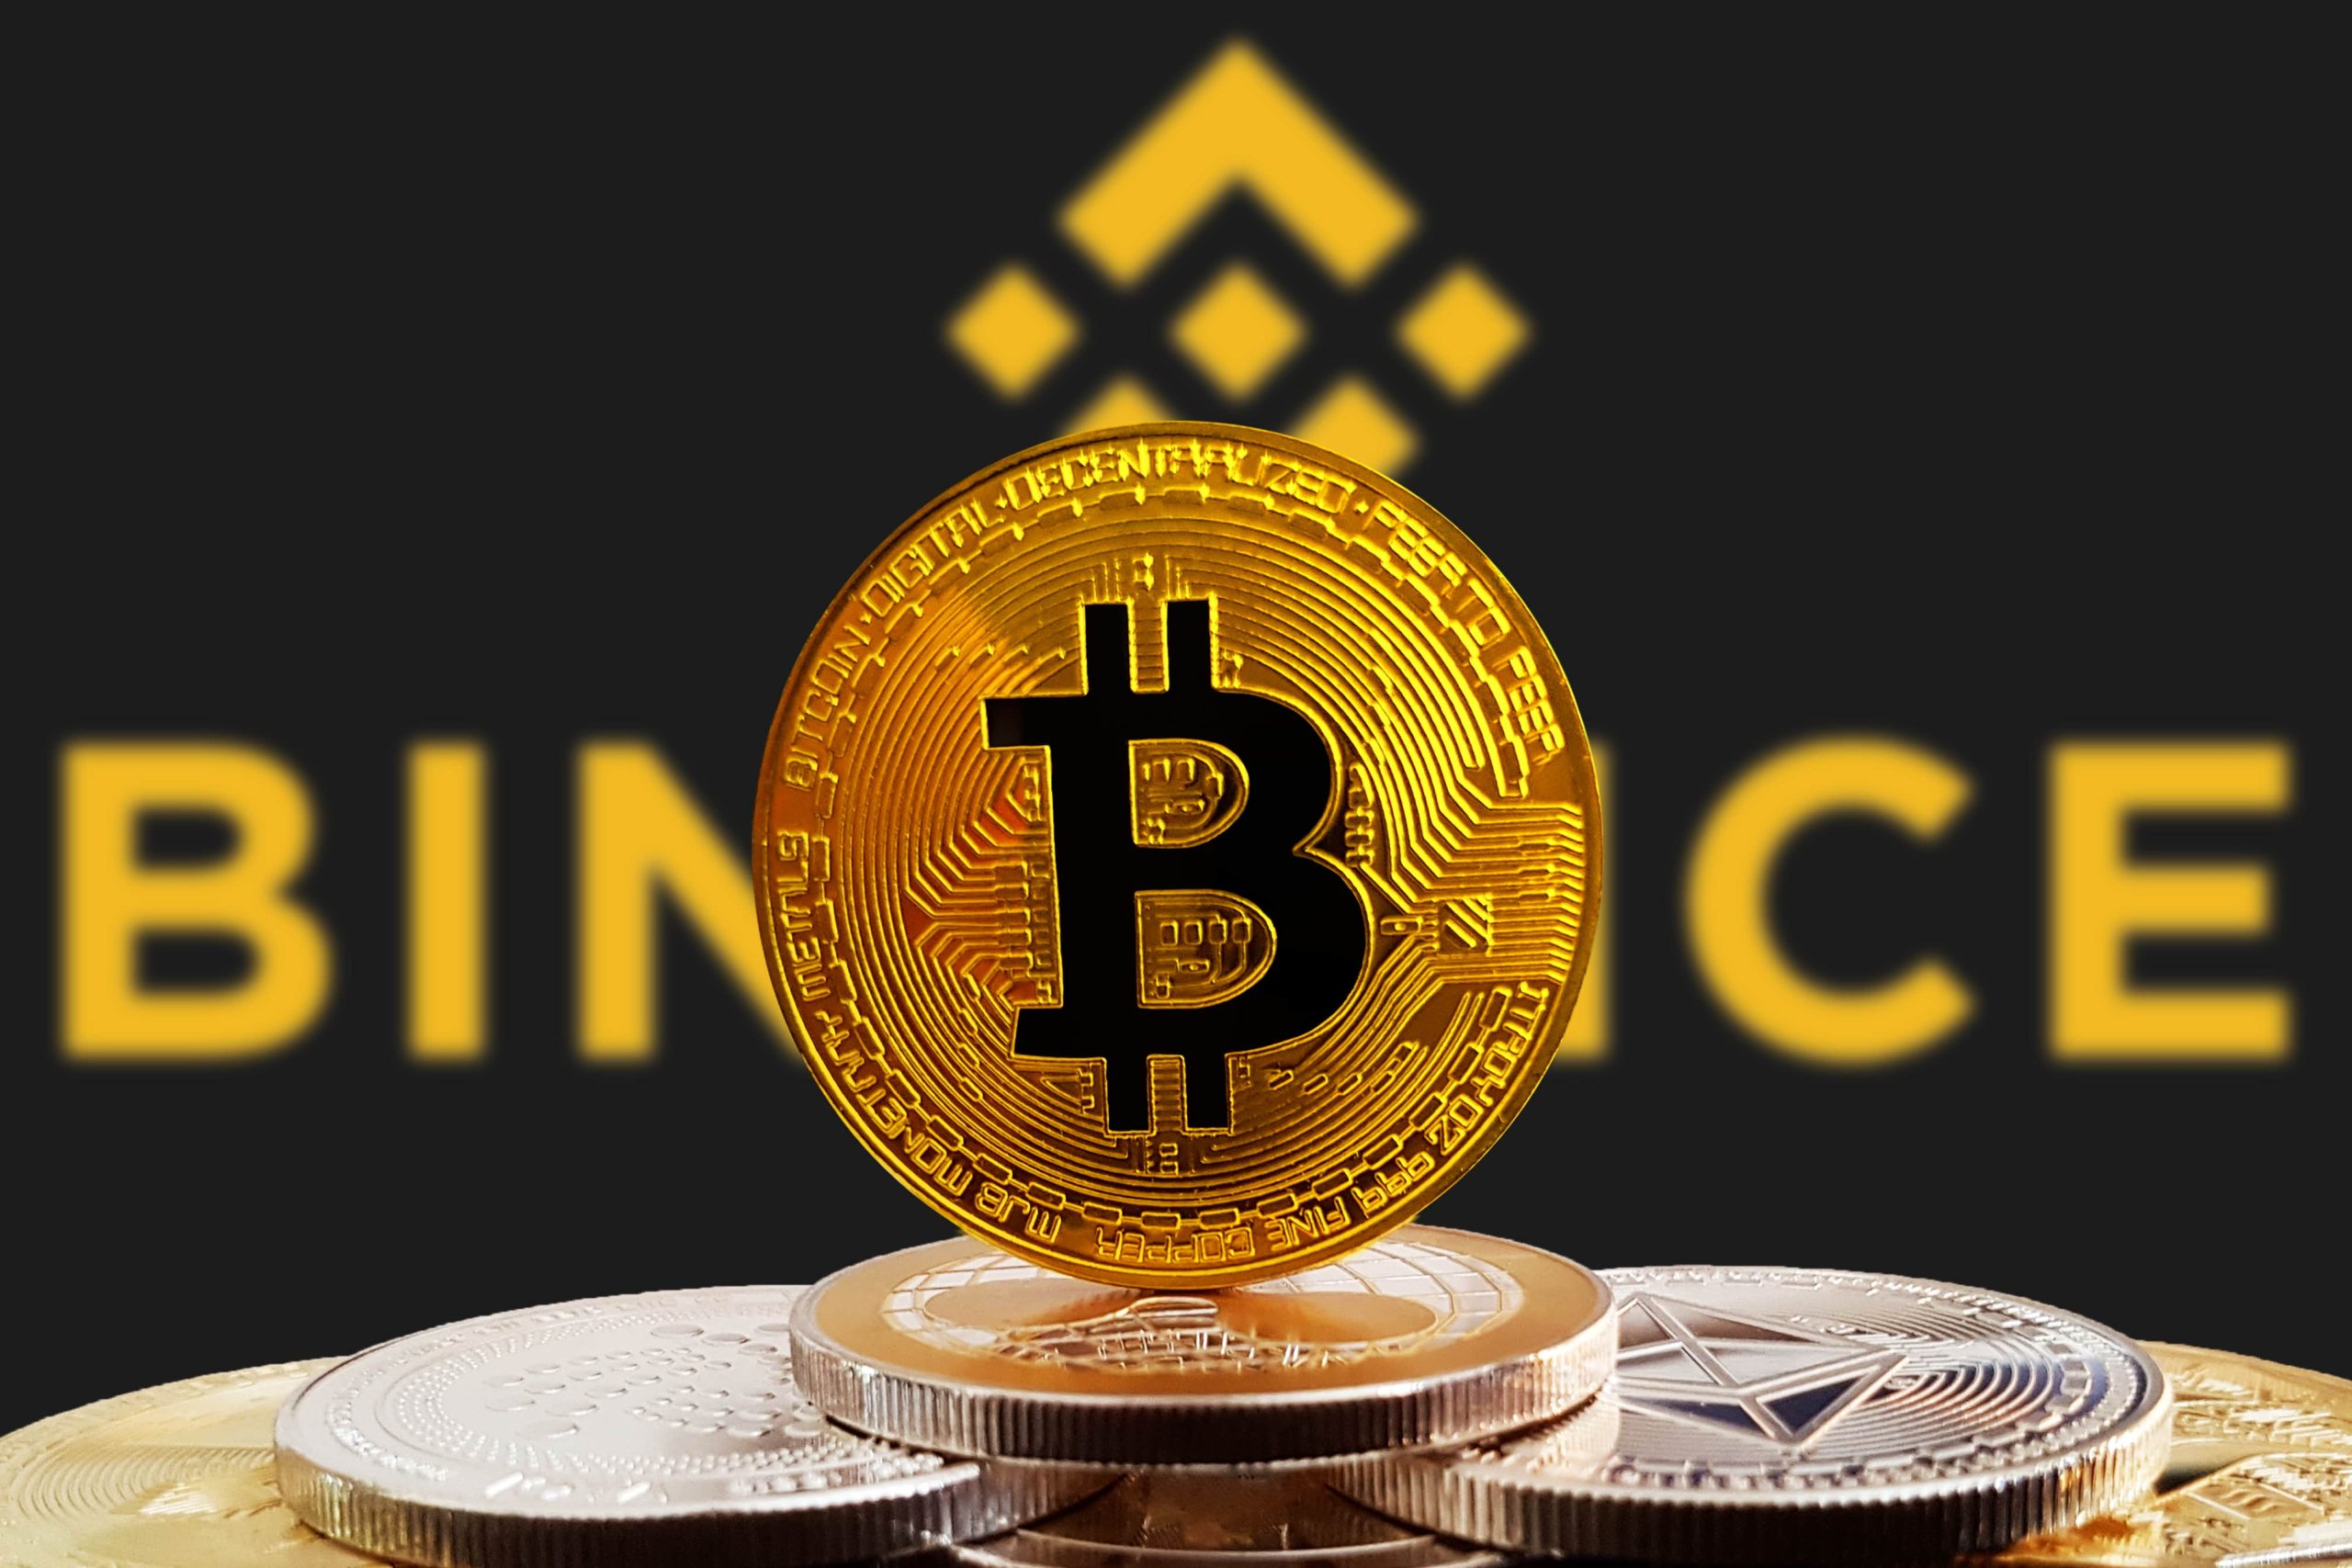 Binance Said to Possess Largest Bitcoin Reserves Globally: Reports